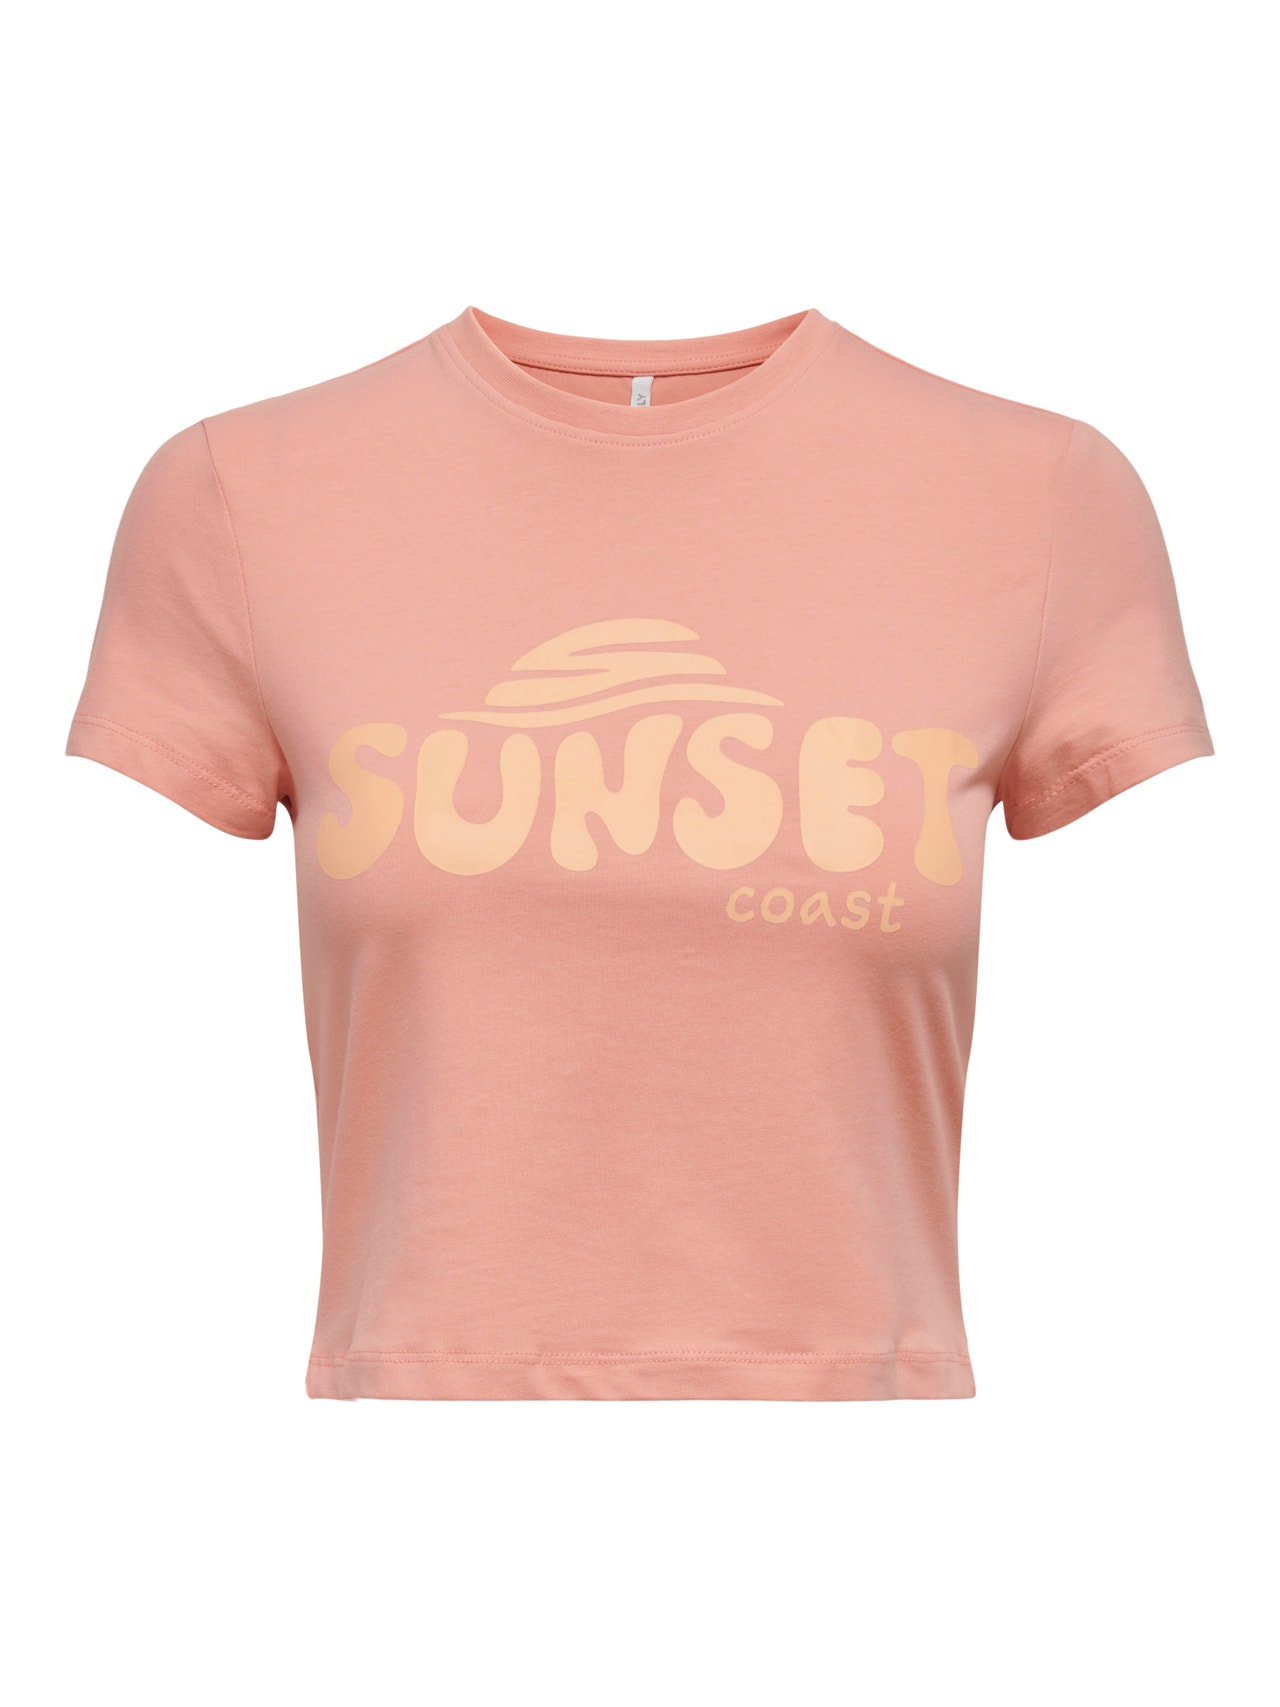 ONLY Cropped o-neck t-shirt -Coral Haze - 15296958